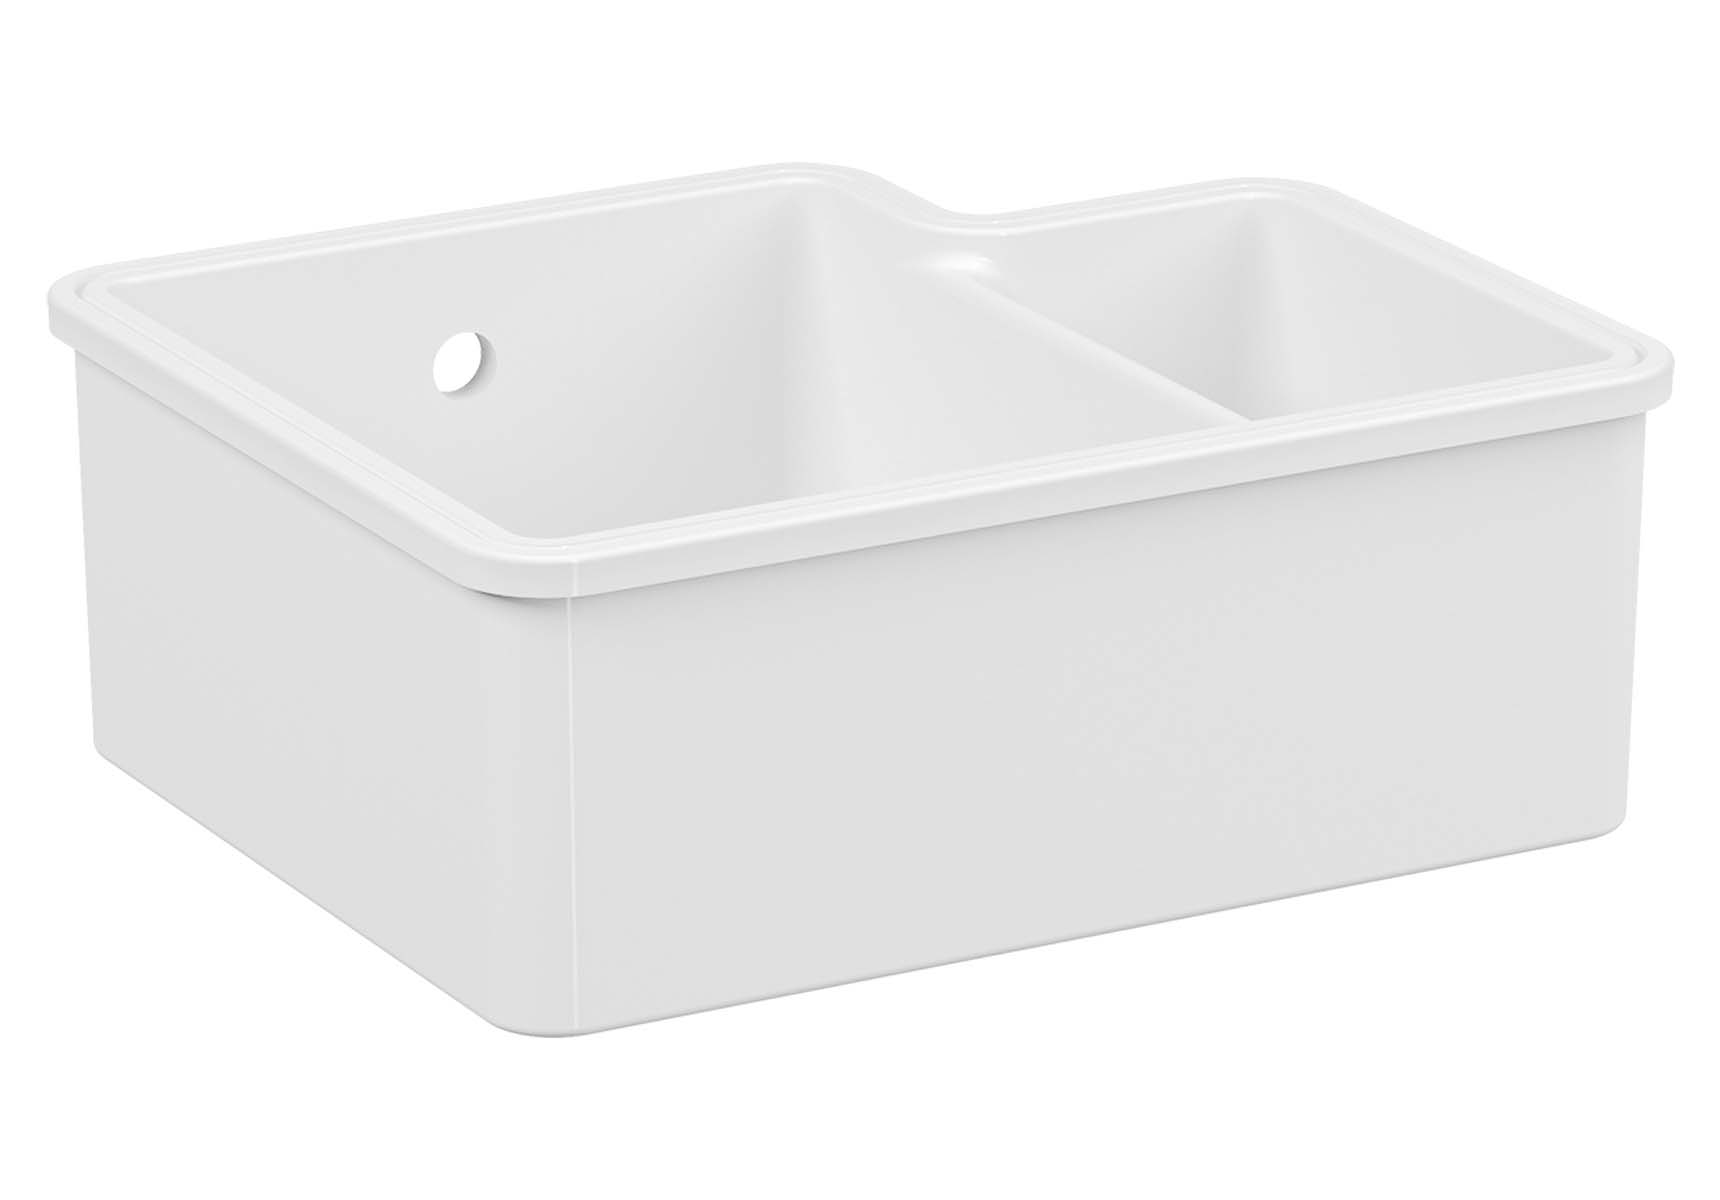 Undercounter Sink, 55 cm, 1.5 bowl, without tap hole, with overflow hole, matte mink